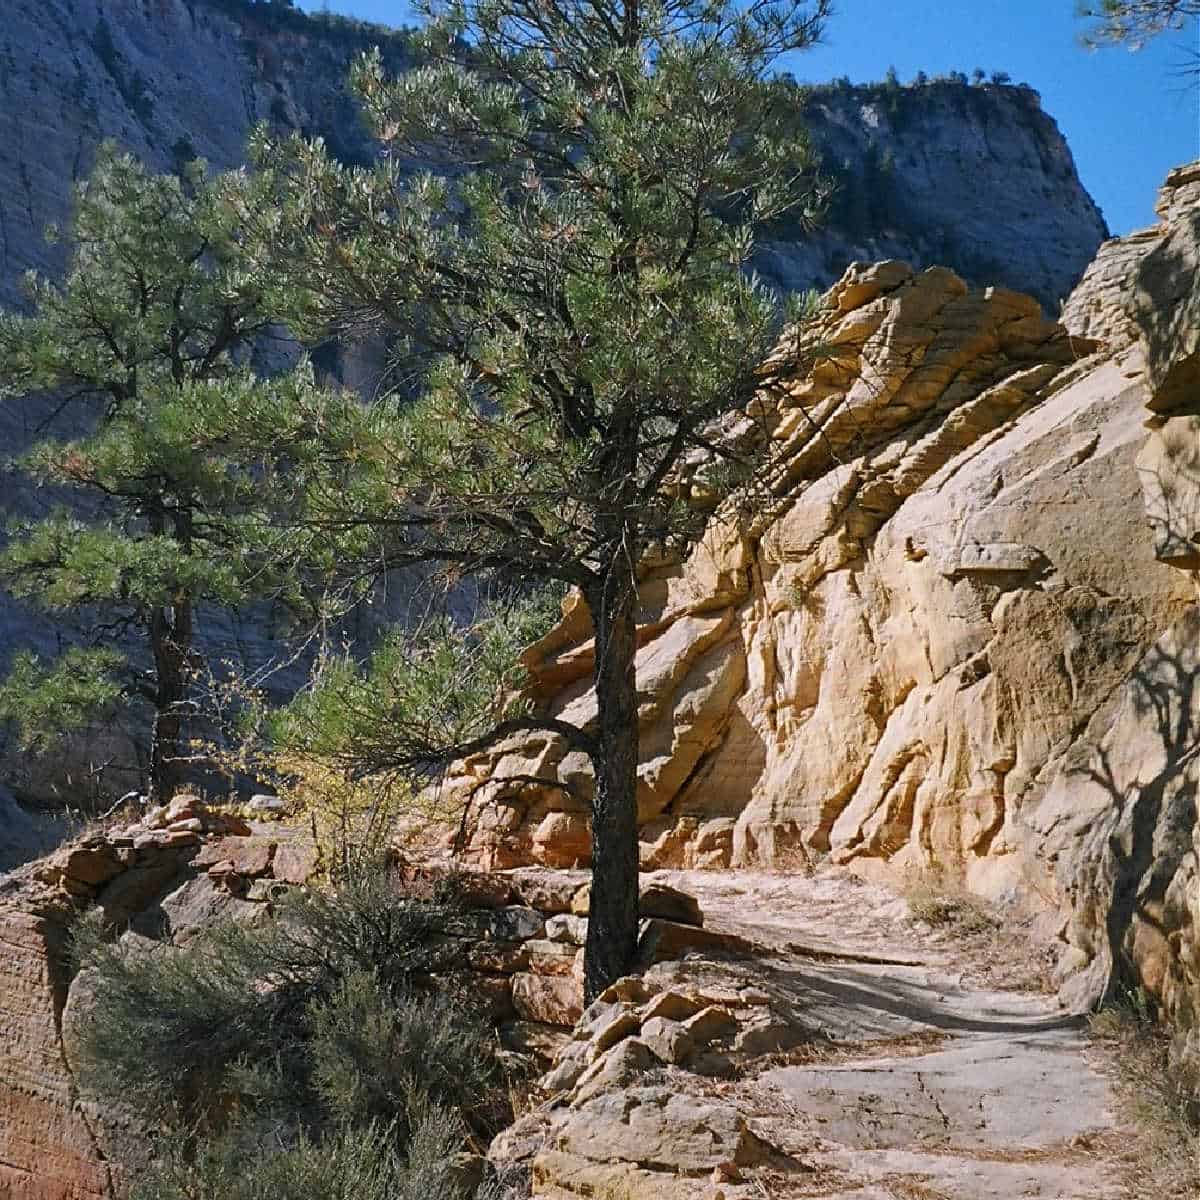 Trail to Observation Point in Zion National Point. Observation Point has an epic view down the Zion Canyon! 